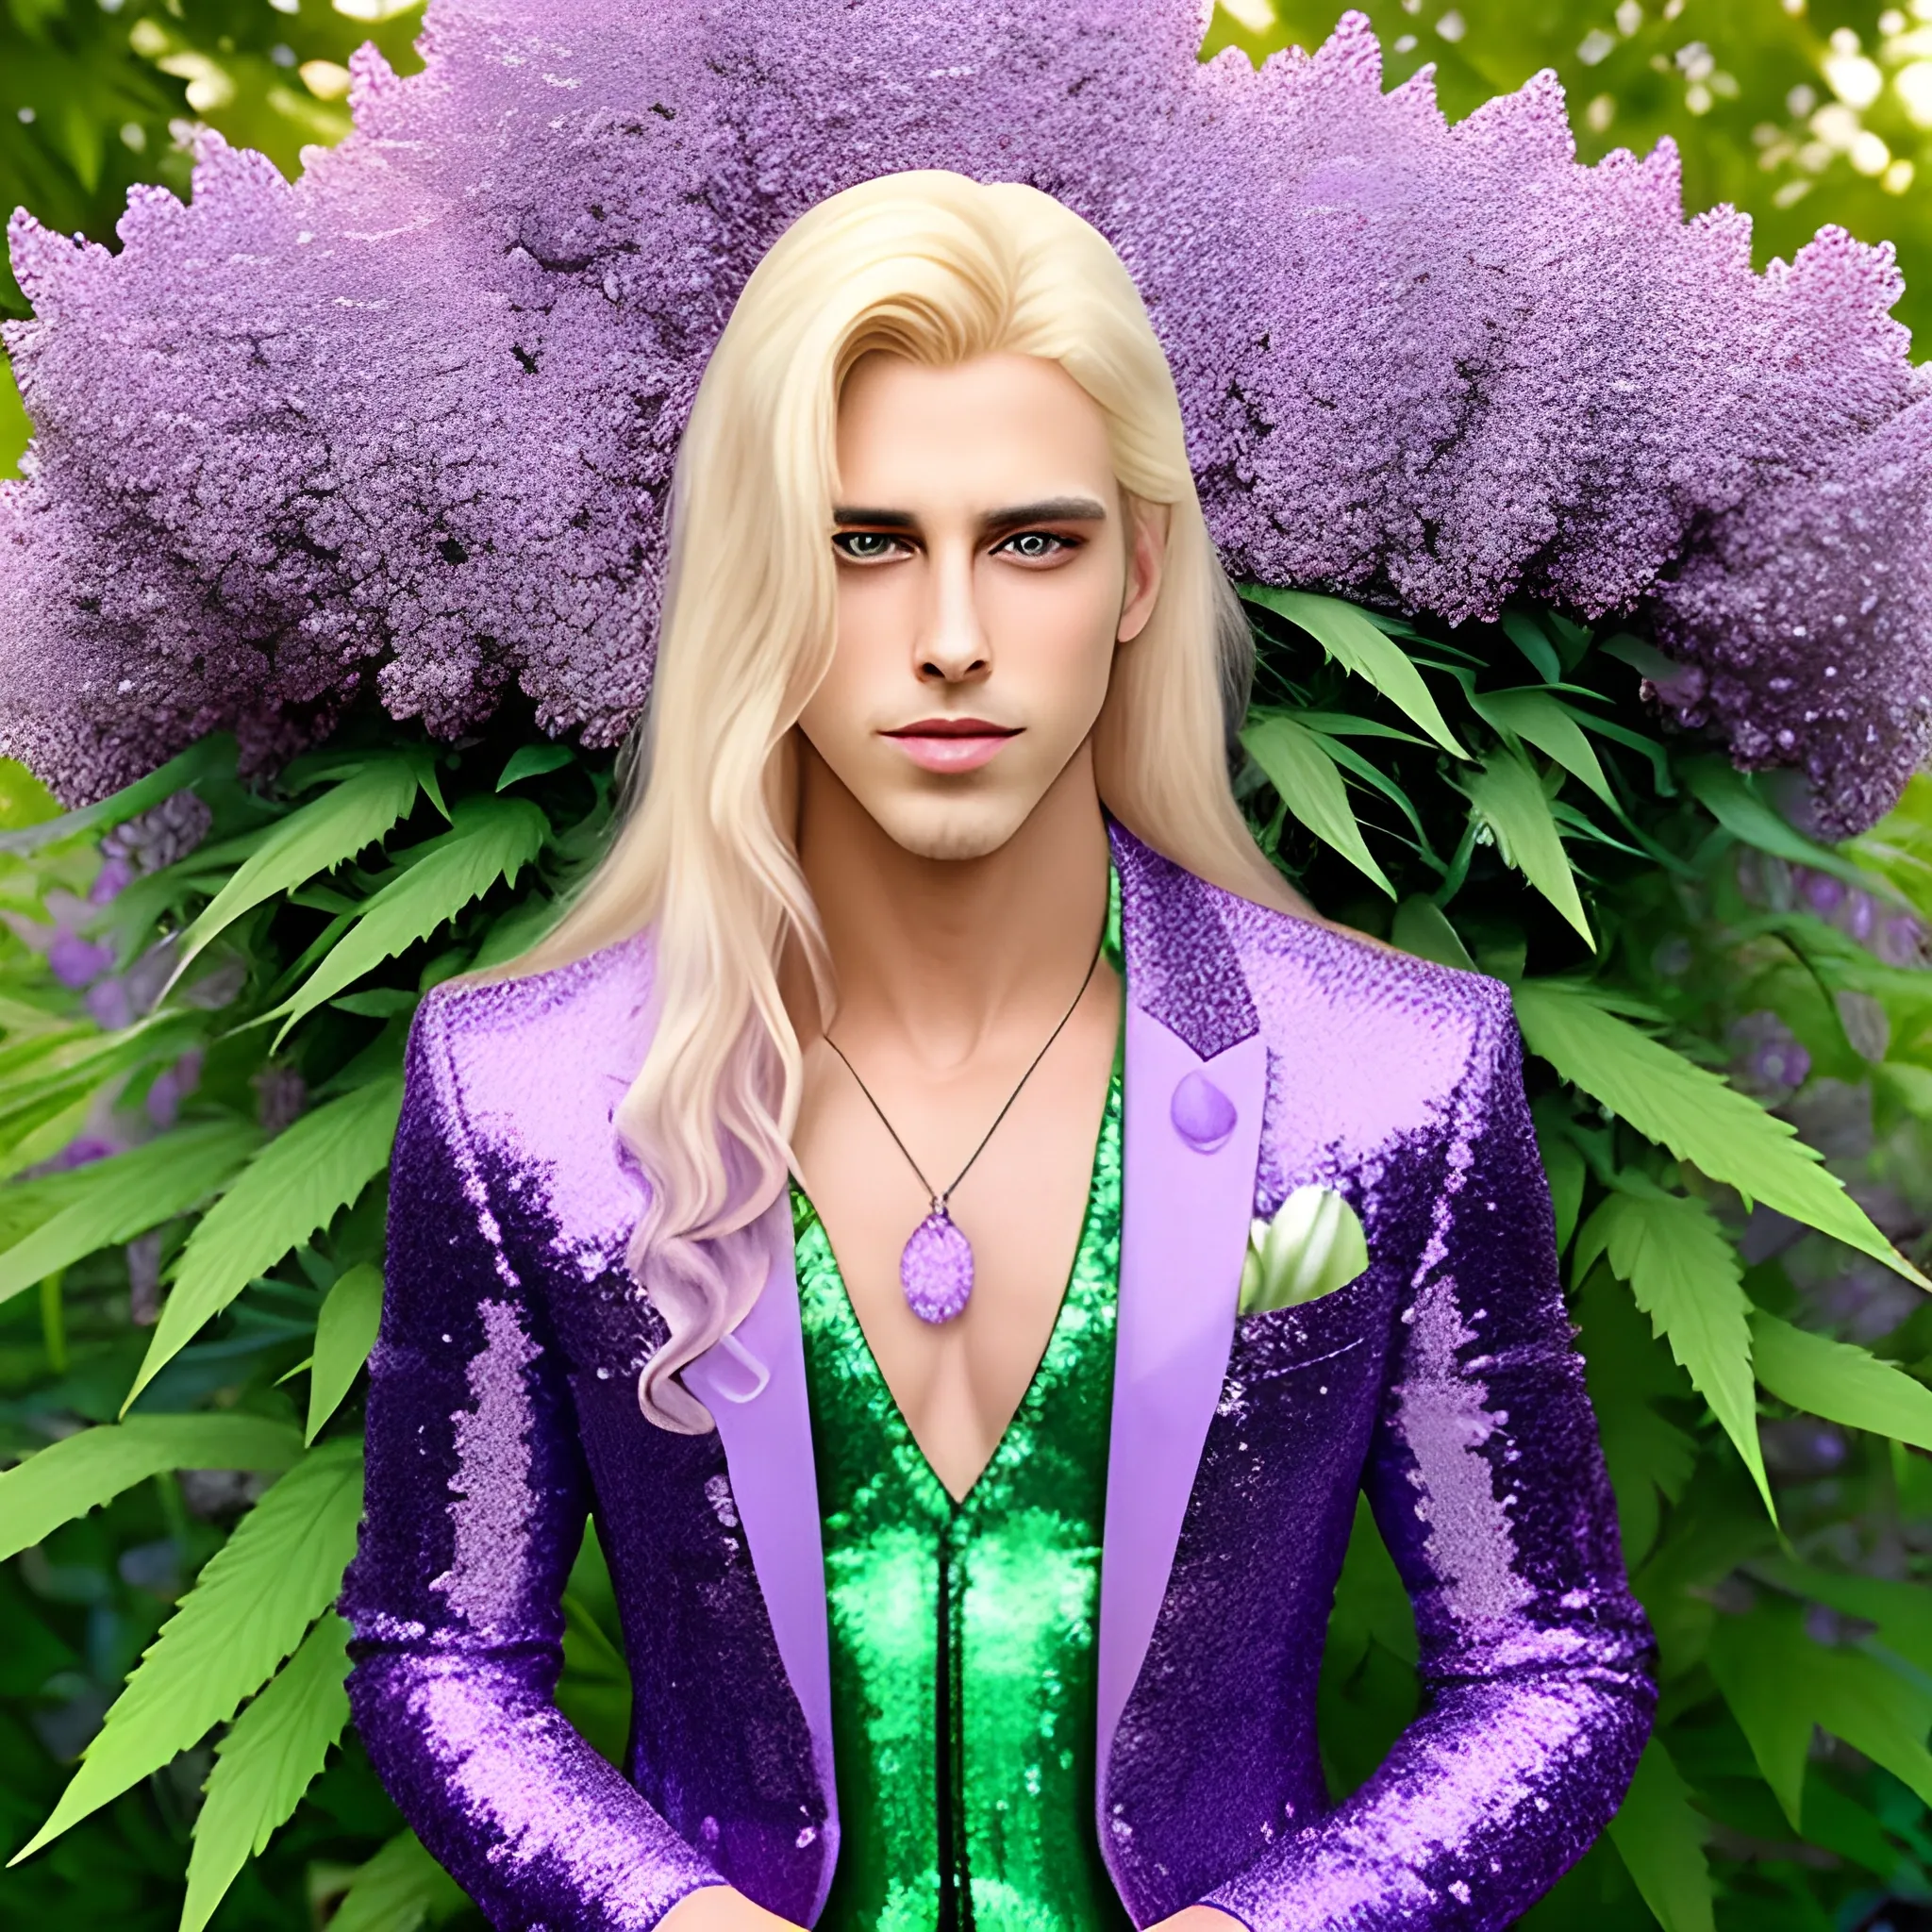 Lilac Prince, beautiful man wears a green sequined suit. he has long, sleek blond hair, and sits in front of weed bushes. His features are symmetrical, handsome, and anatomically correct. he wears amethyst jewelry. Lips are soft, in a slight smile.